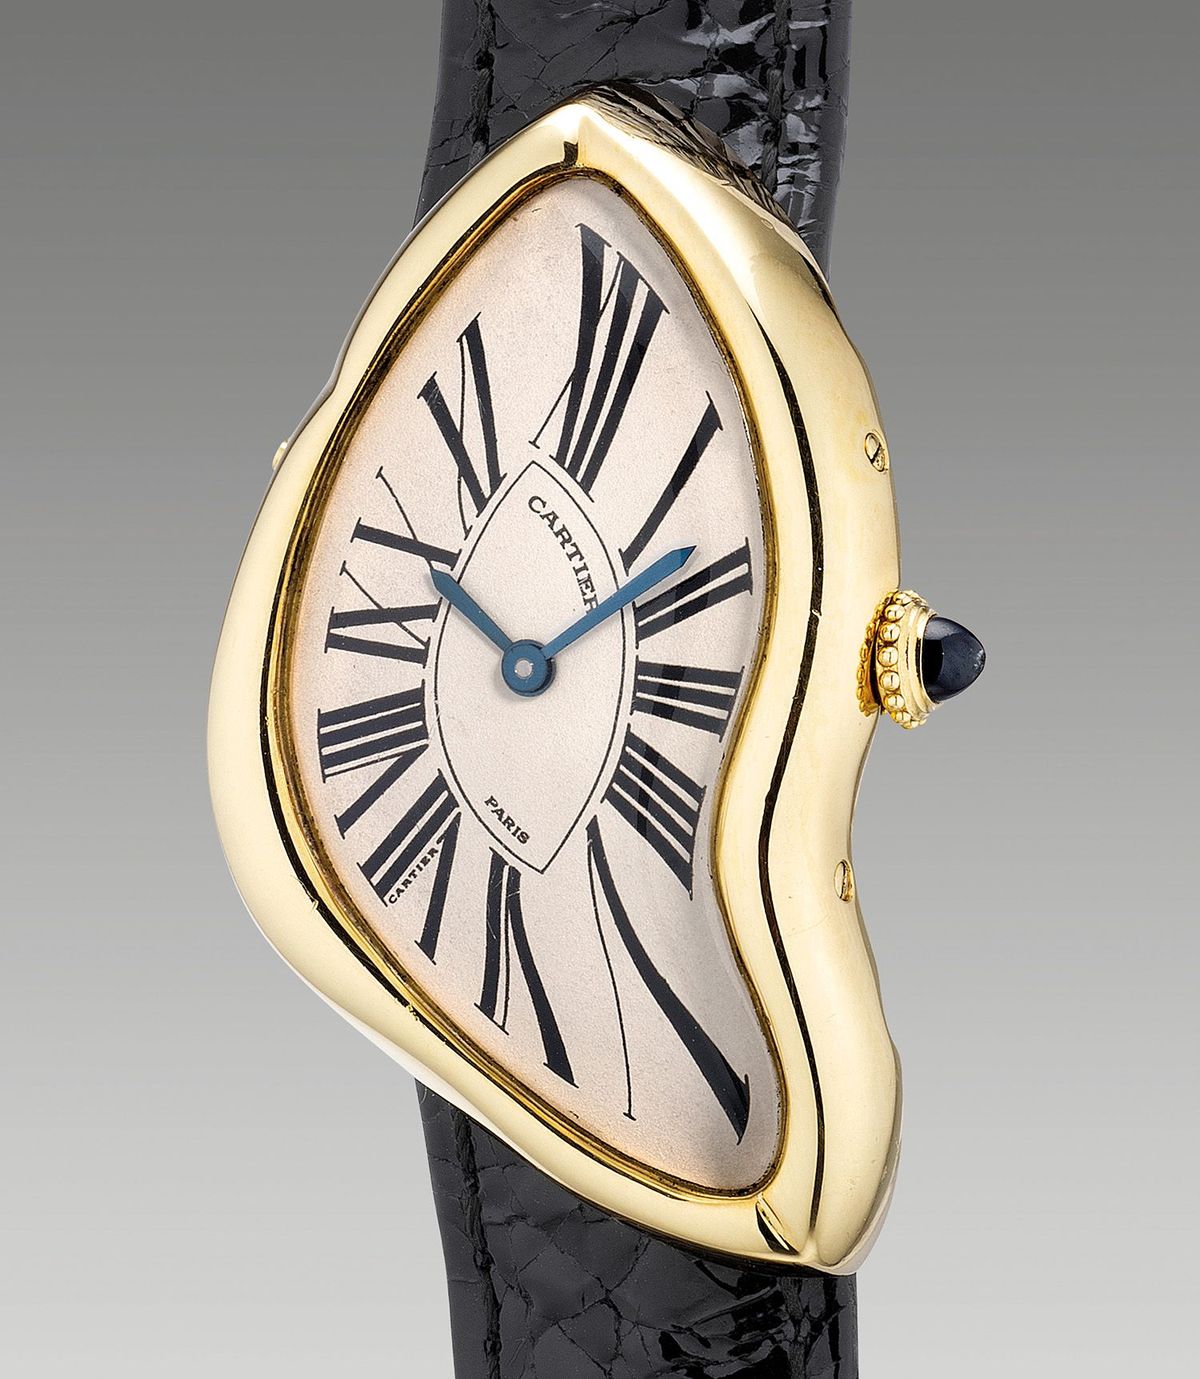 limited edition yellow gold asymmetric wristwatch by Cartier